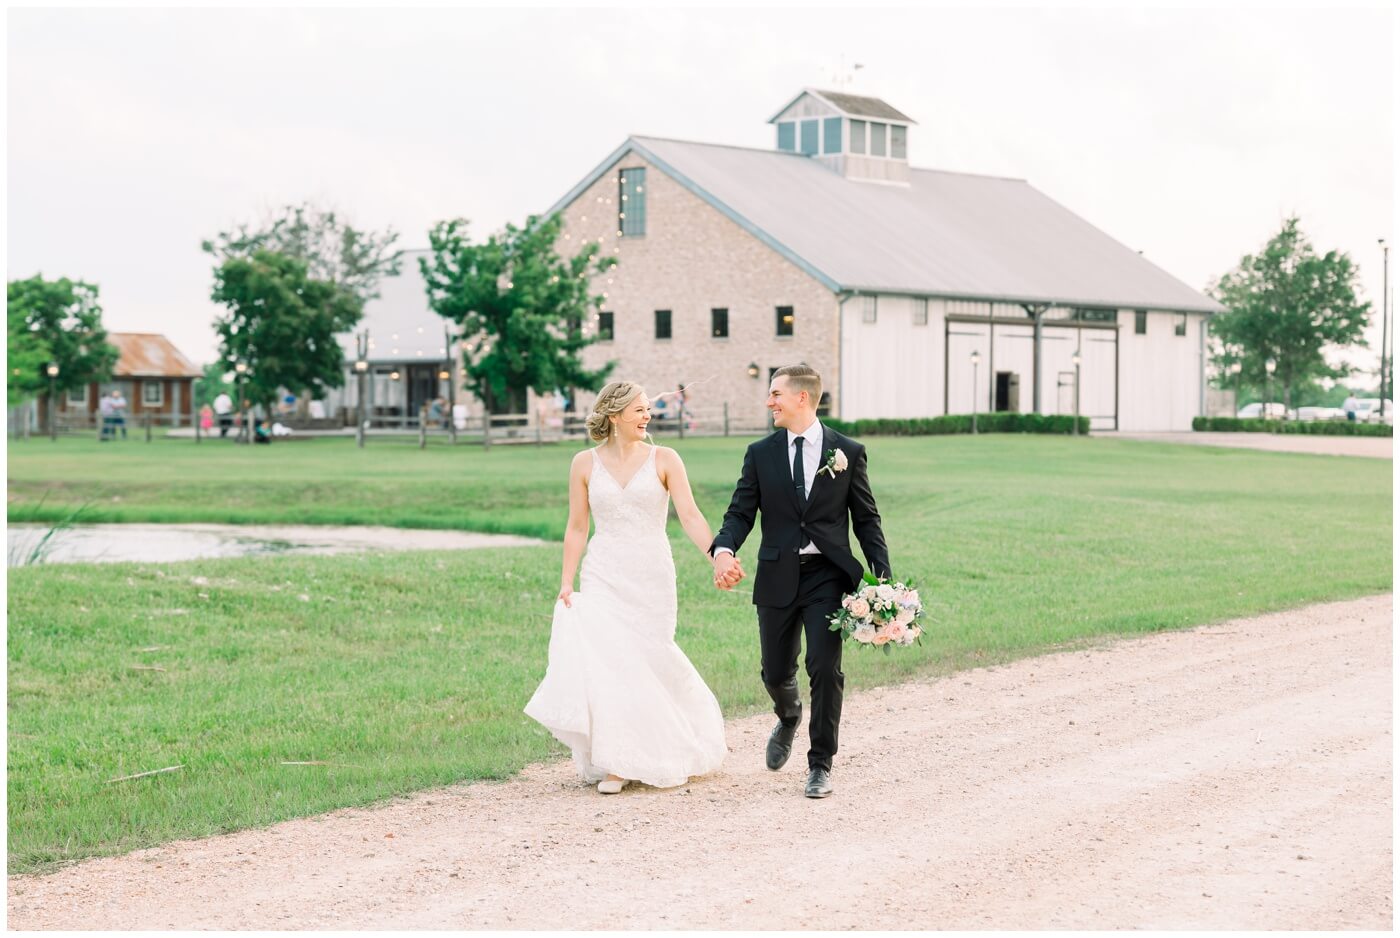 Beckendorff Farms | The couple runs together, laughing joyfully